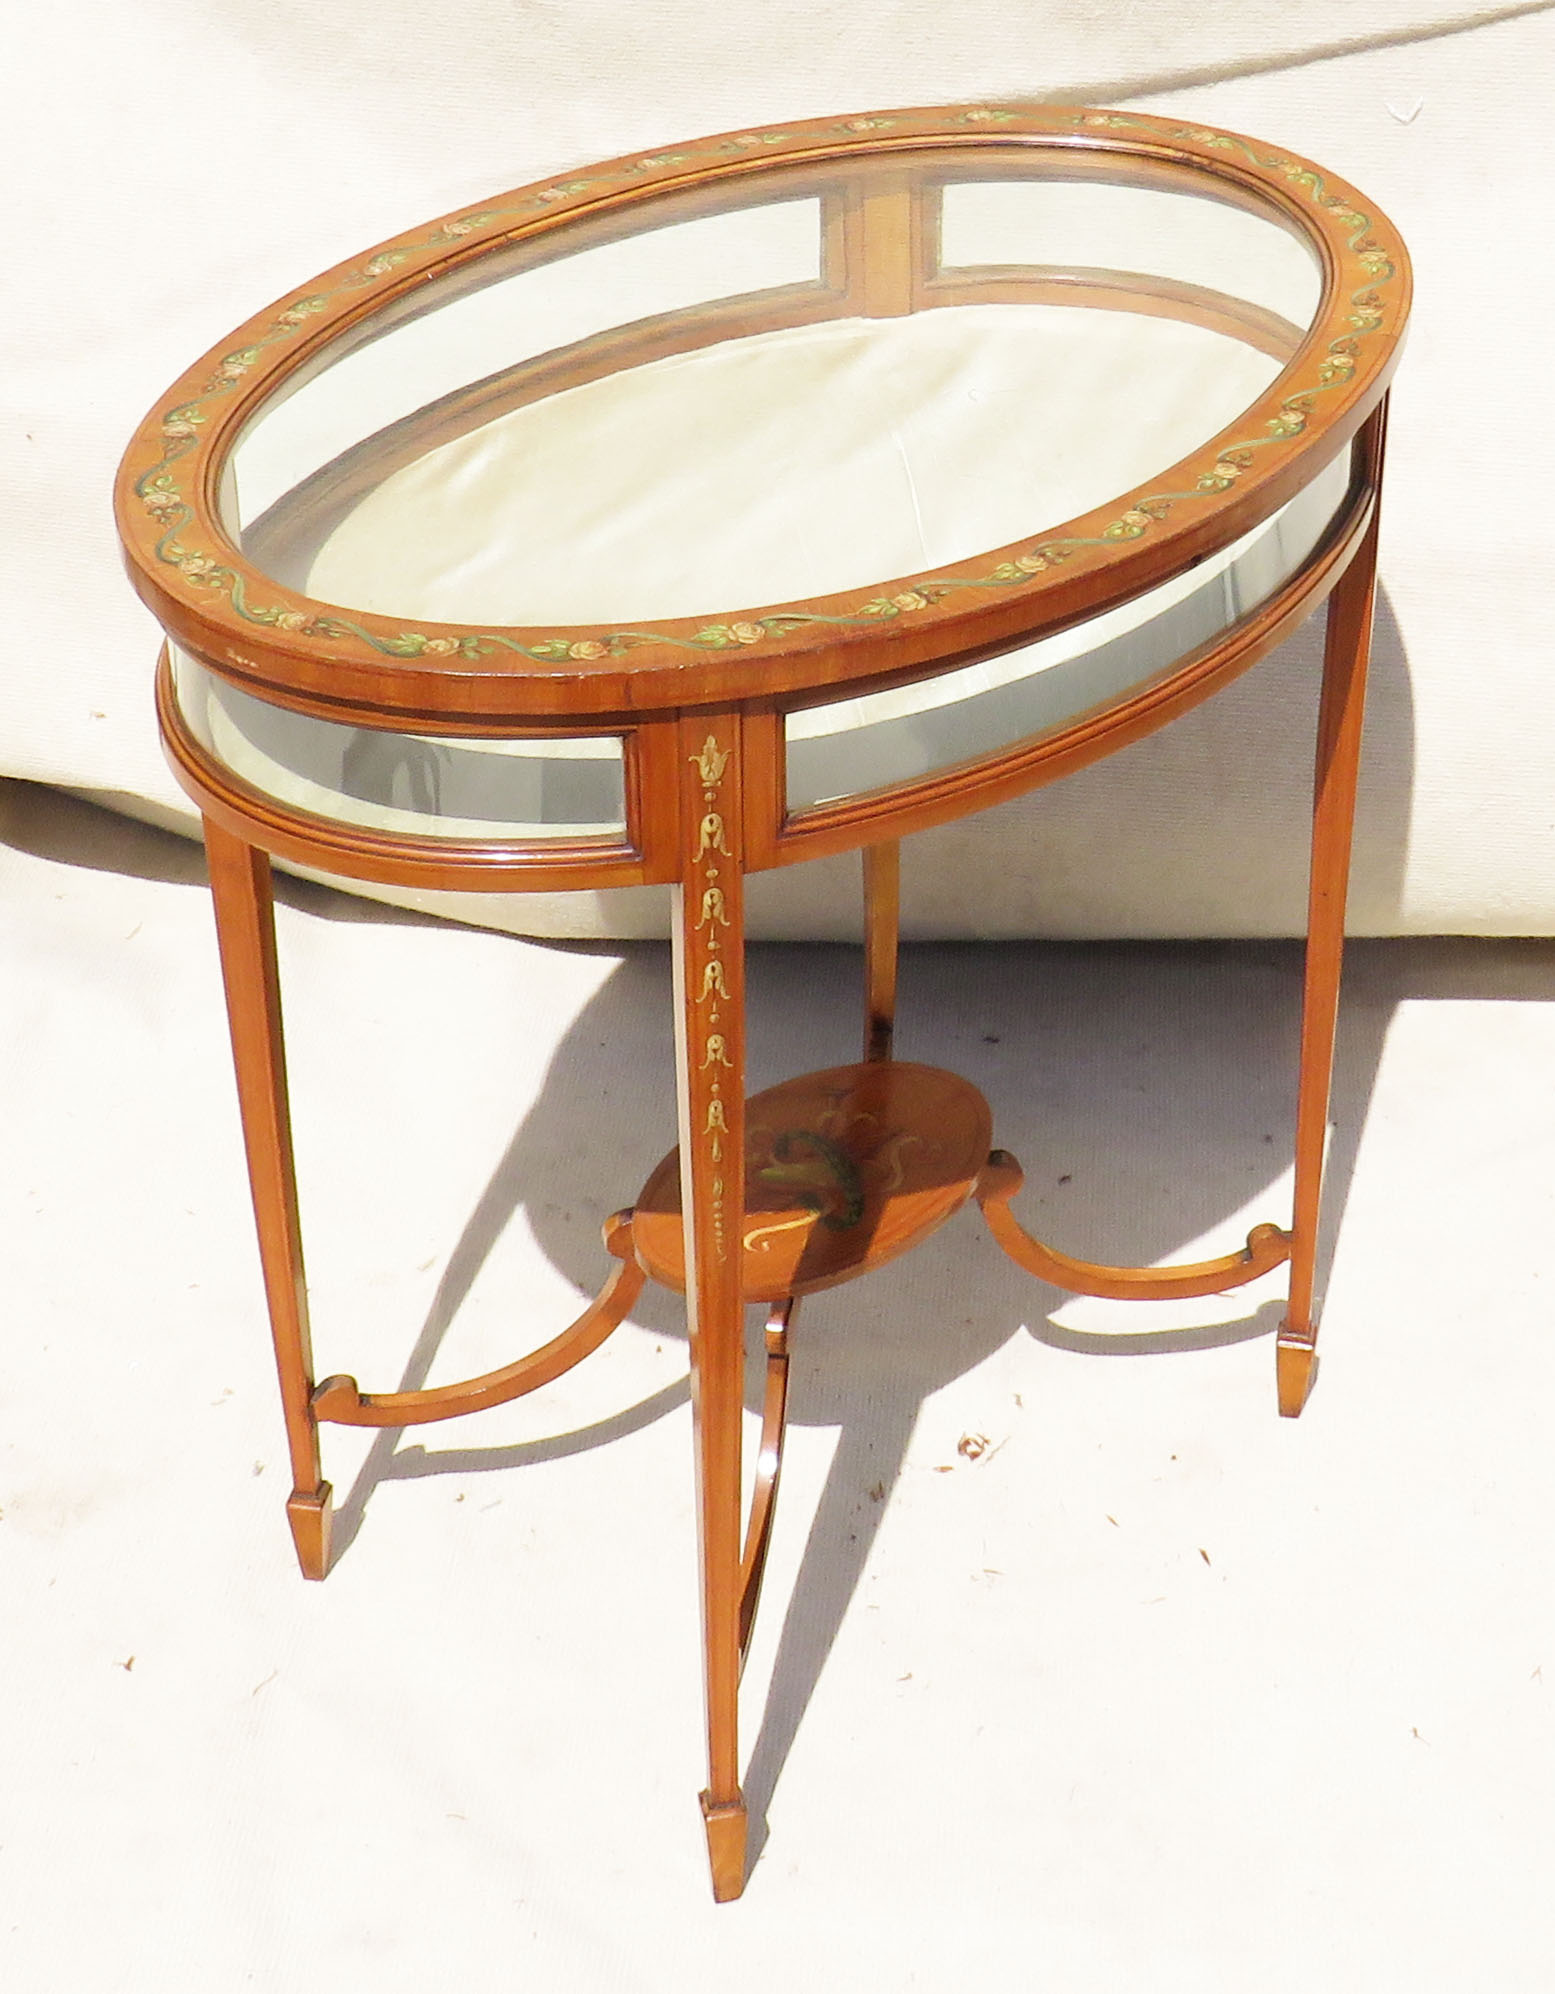 Late 19th Century satinwood oval bijouterie display table with painted & polychrome decoration - Image 2 of 6